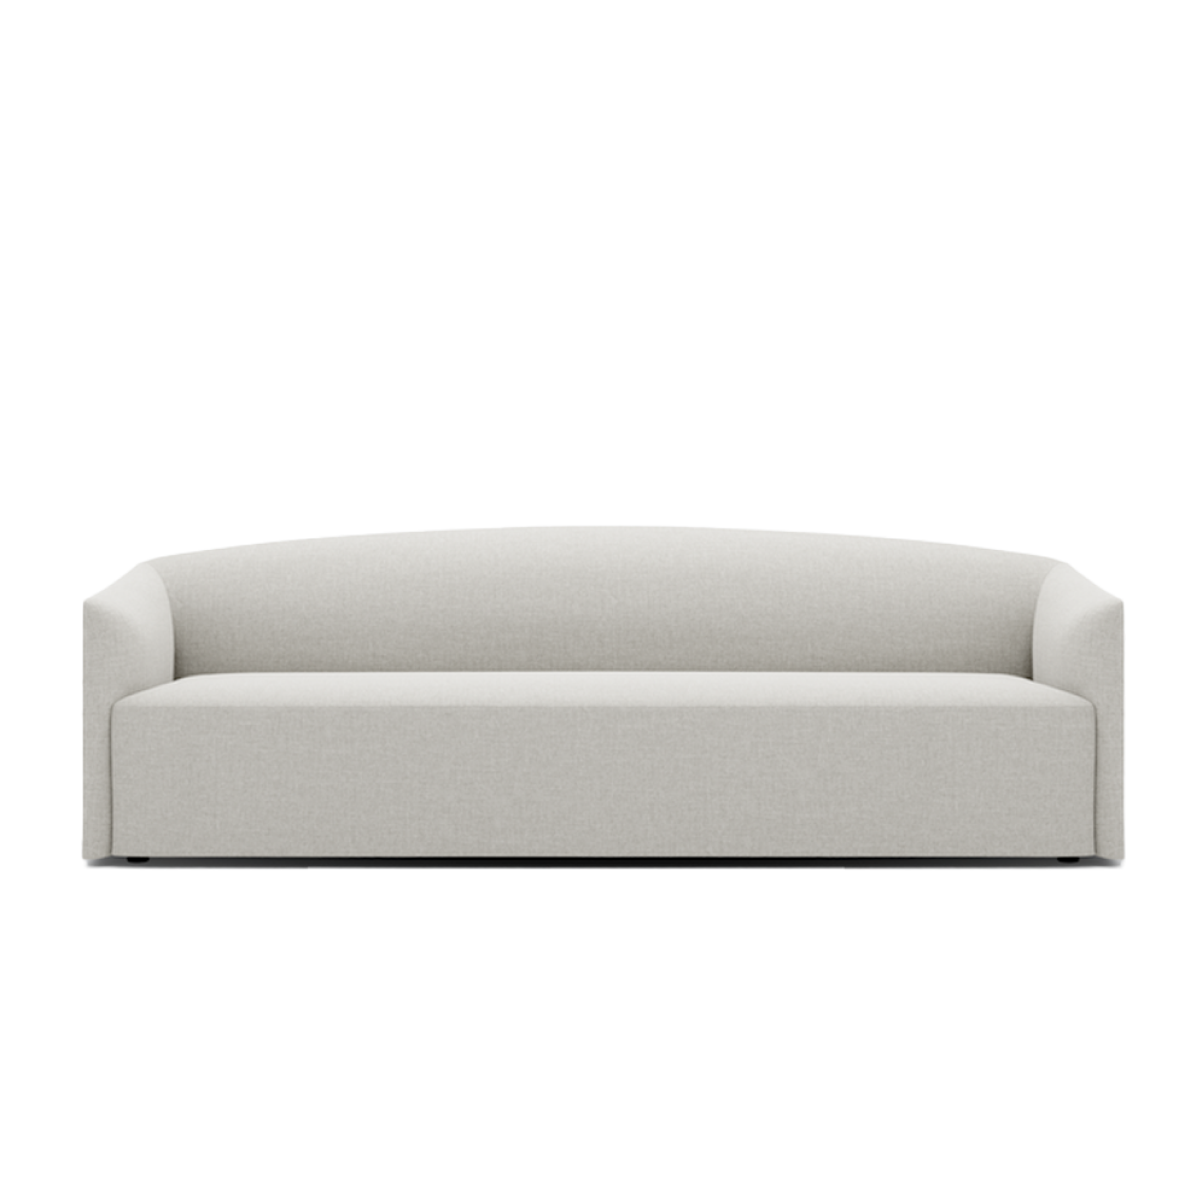 New Works Shore Sofa 3 Seater Extended Base - Quill